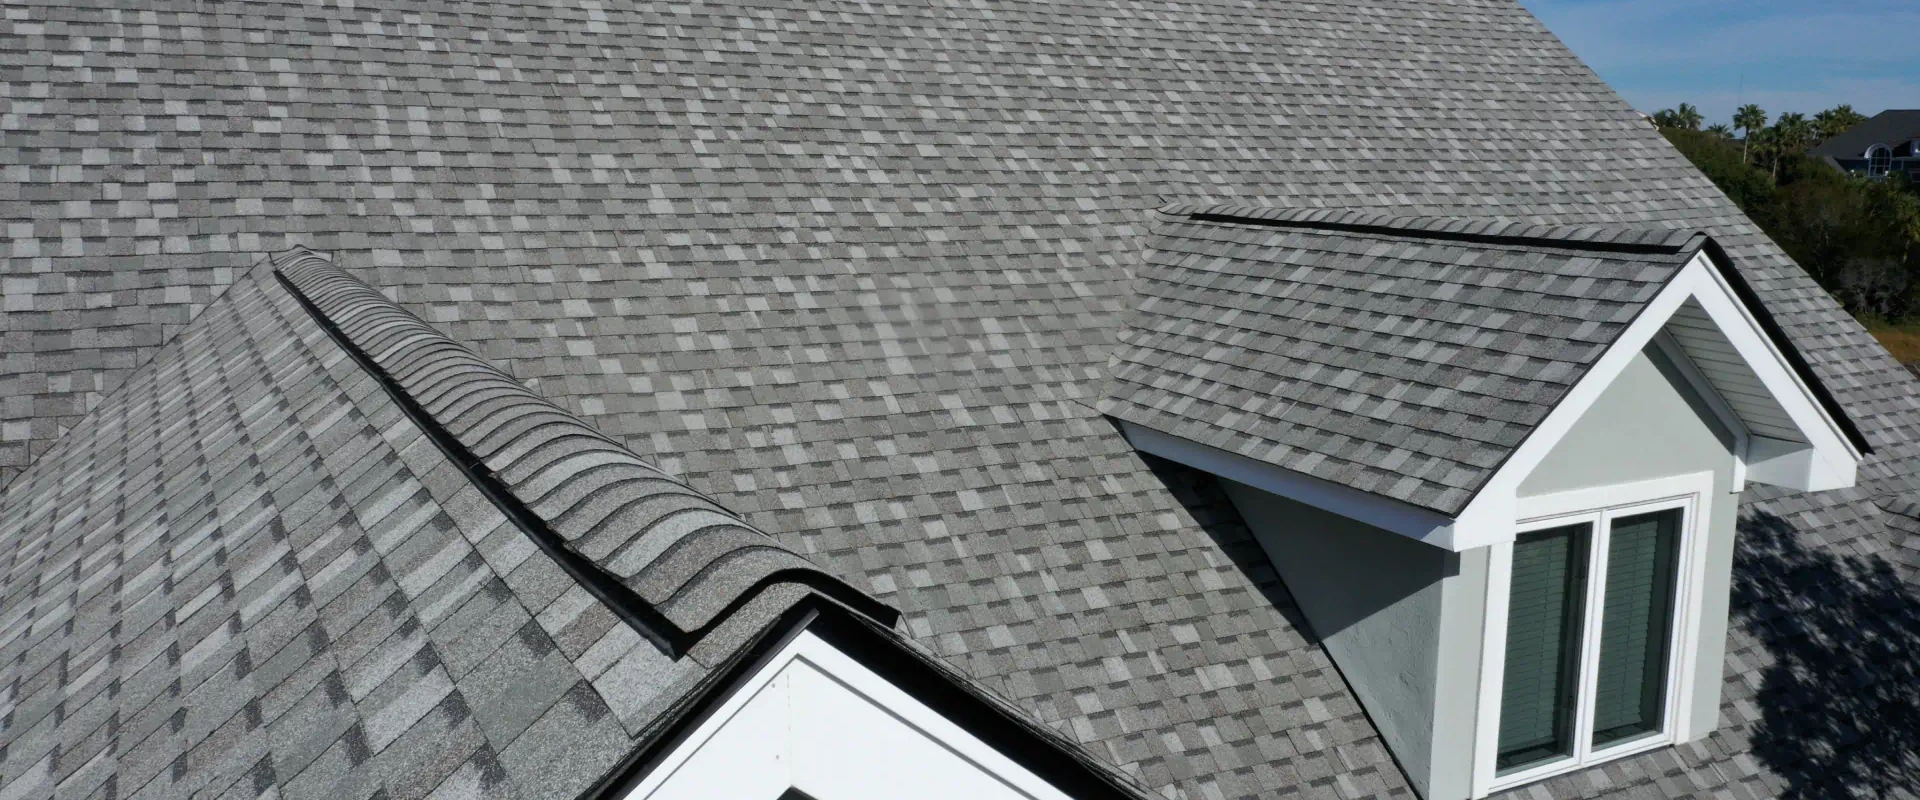 shingles rooftop and sidings installed on a house